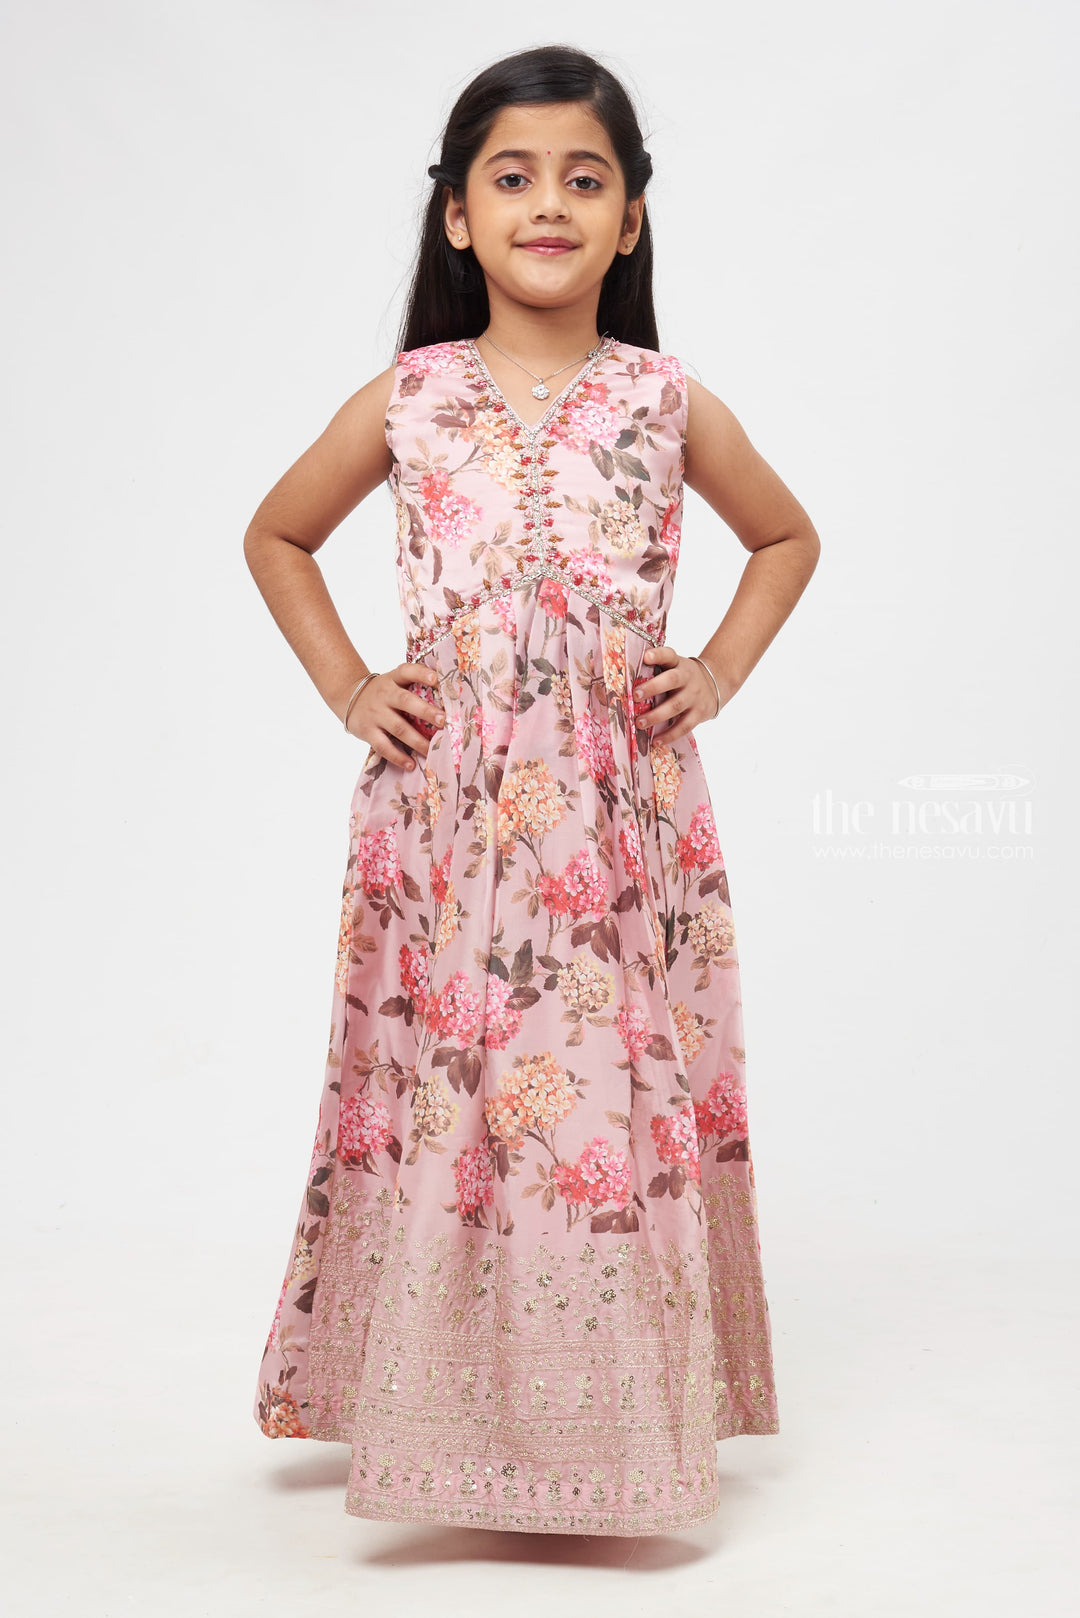 The Nesavu Girls Party Gown Delicate Blossom Diwali Gown with Shimmering Silver Detailing Anarkali for Girls Nesavu 24 (5Y) / Pink / Organza Printed GA175A-24 Girls Delicate Blossom Gown | Diwali Shimmer Collection | Floral Festive Dress | The Nesavu